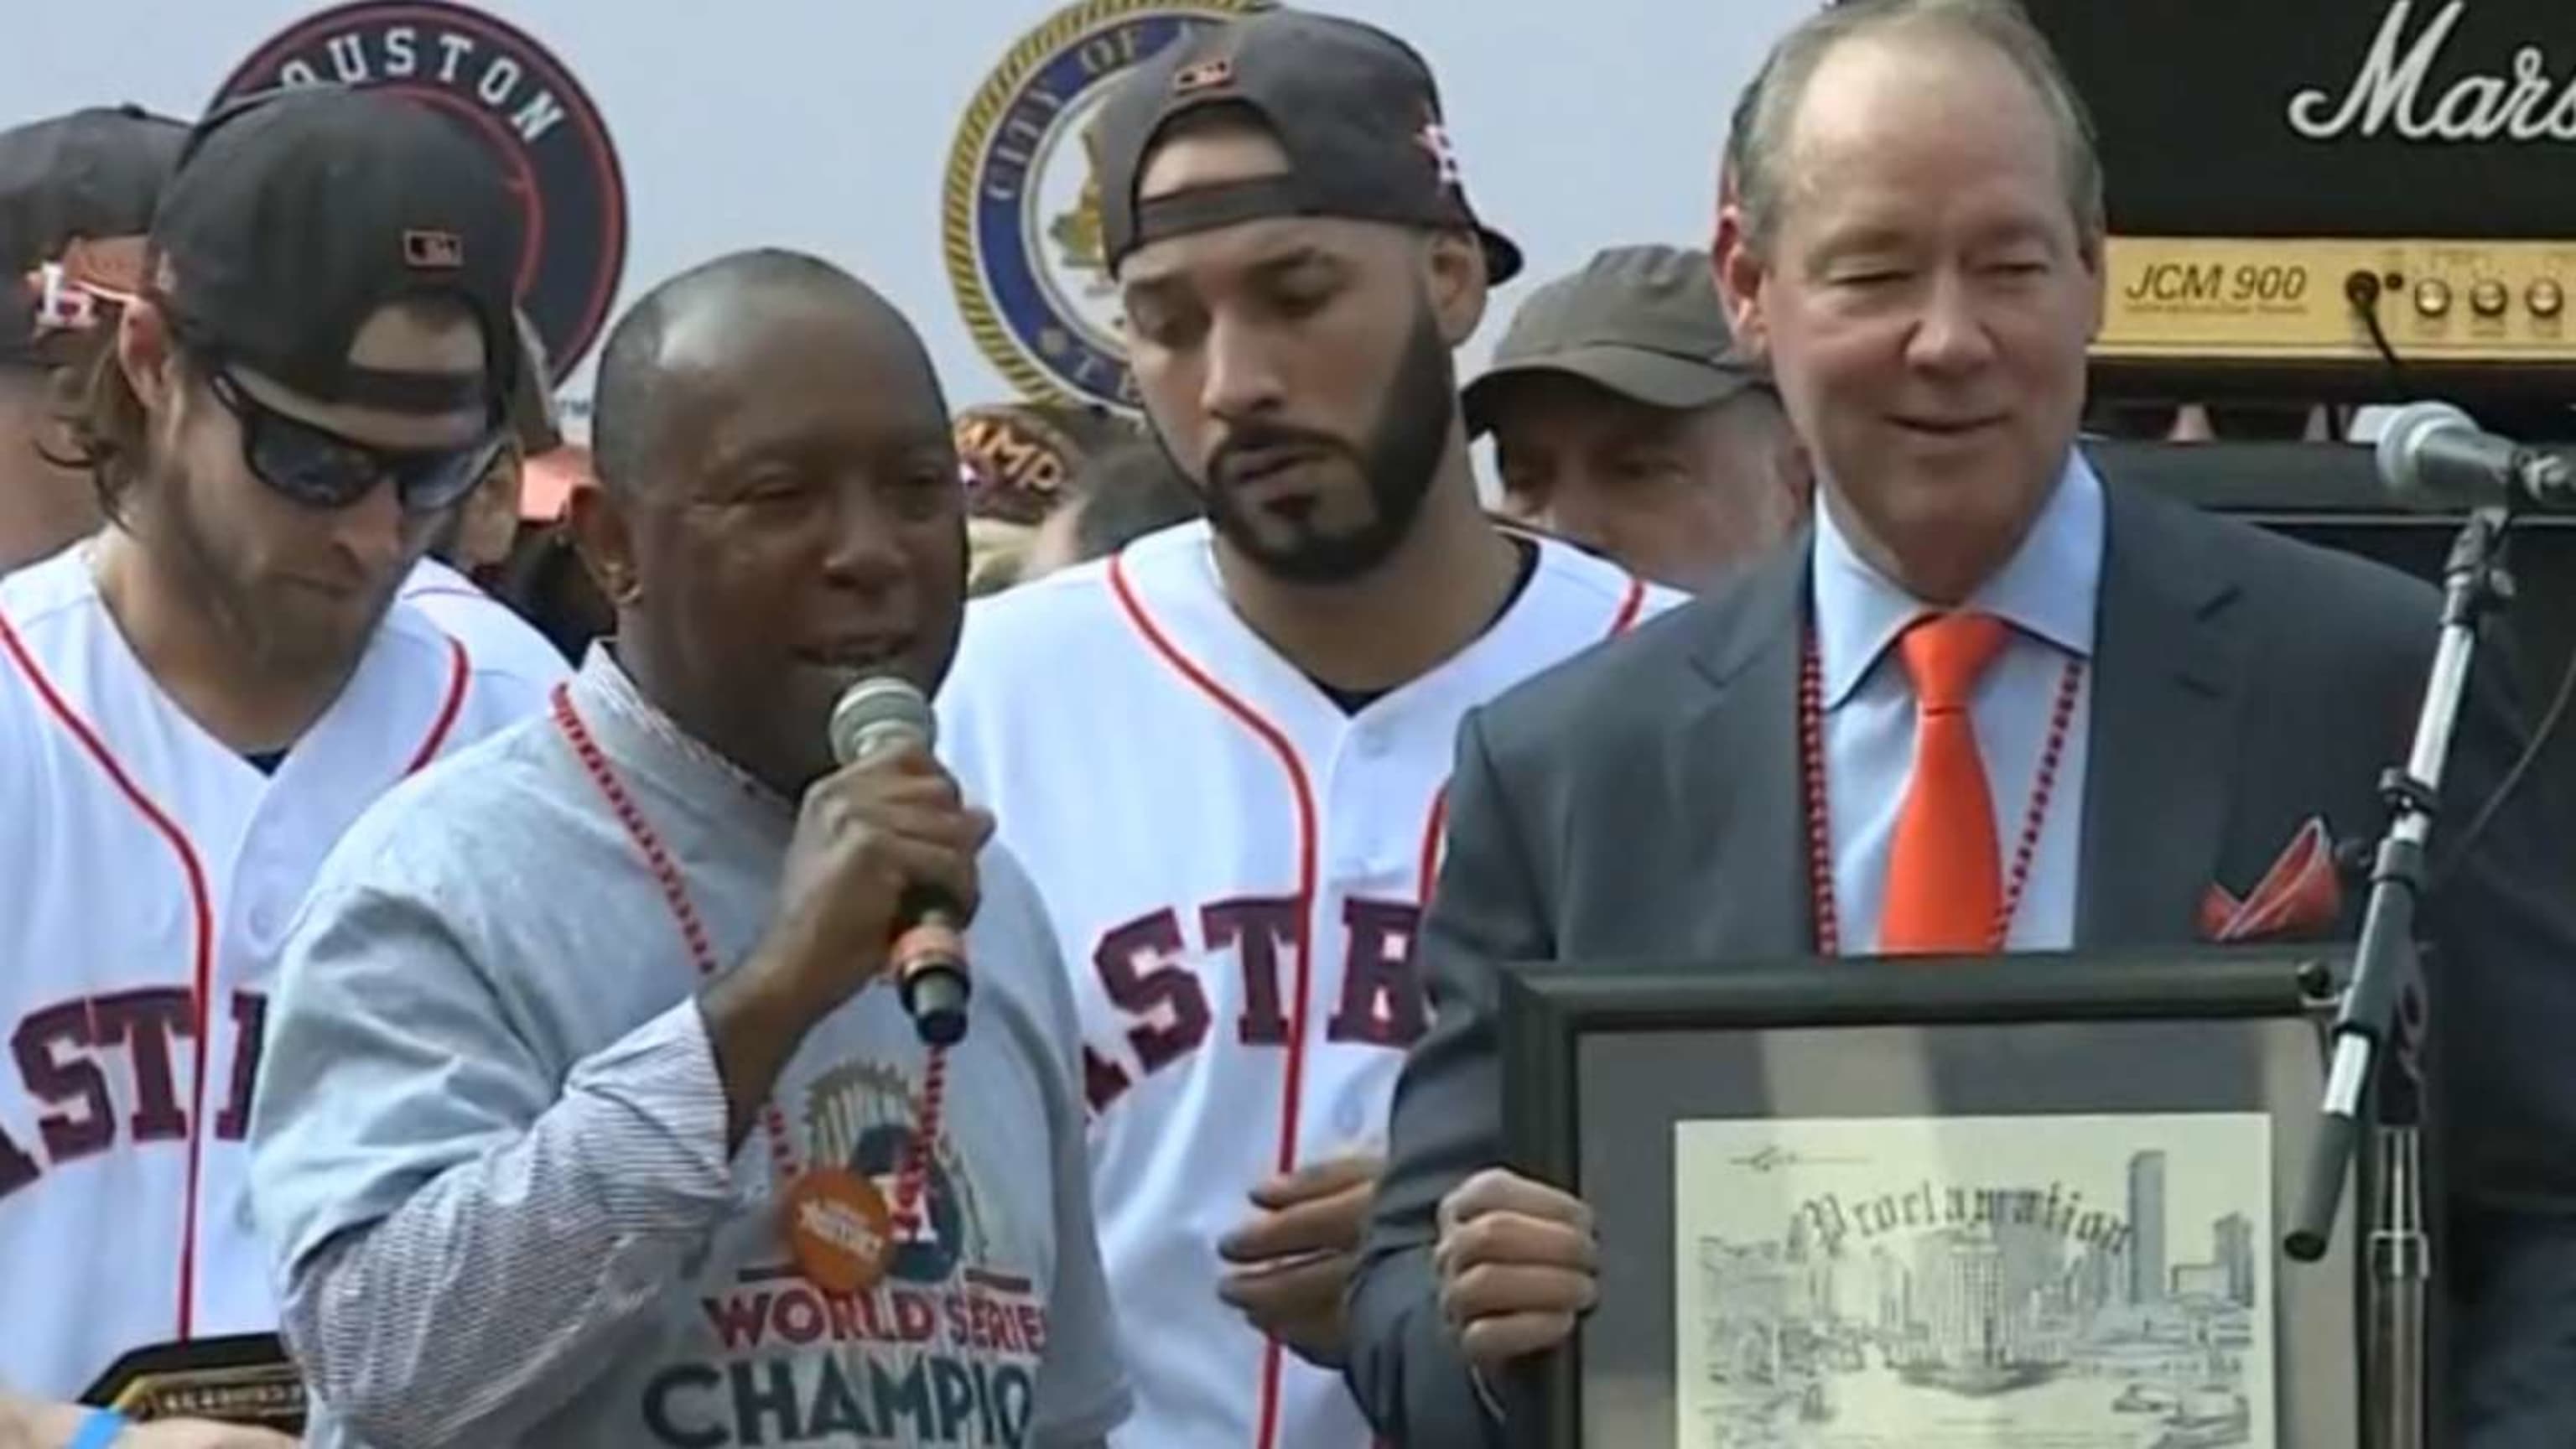 Houston pays tribute to Astros with parade